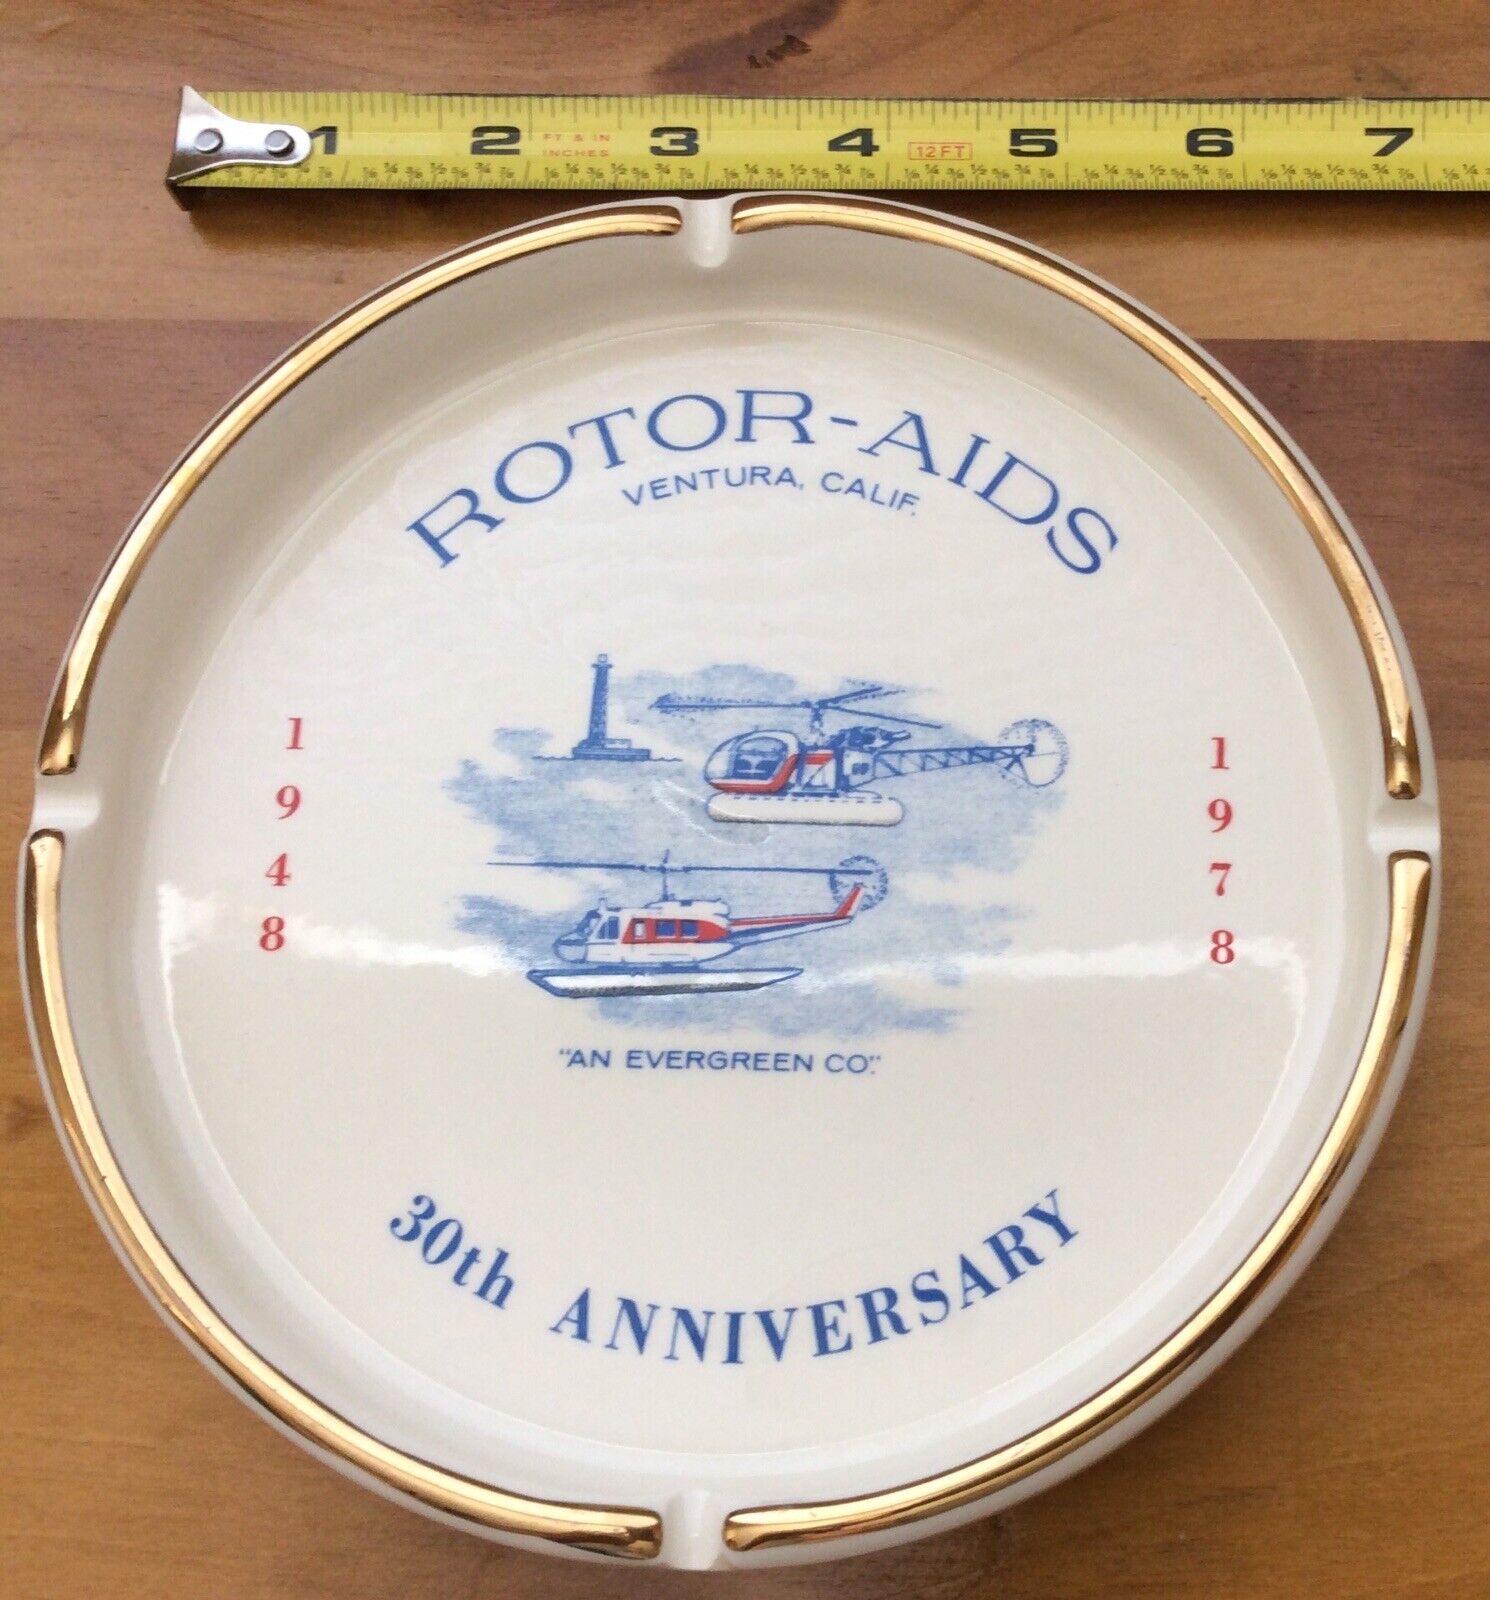 Rotor-Aids Helicopter Operator, Anniversary Dish, Ashtray 1948-1978